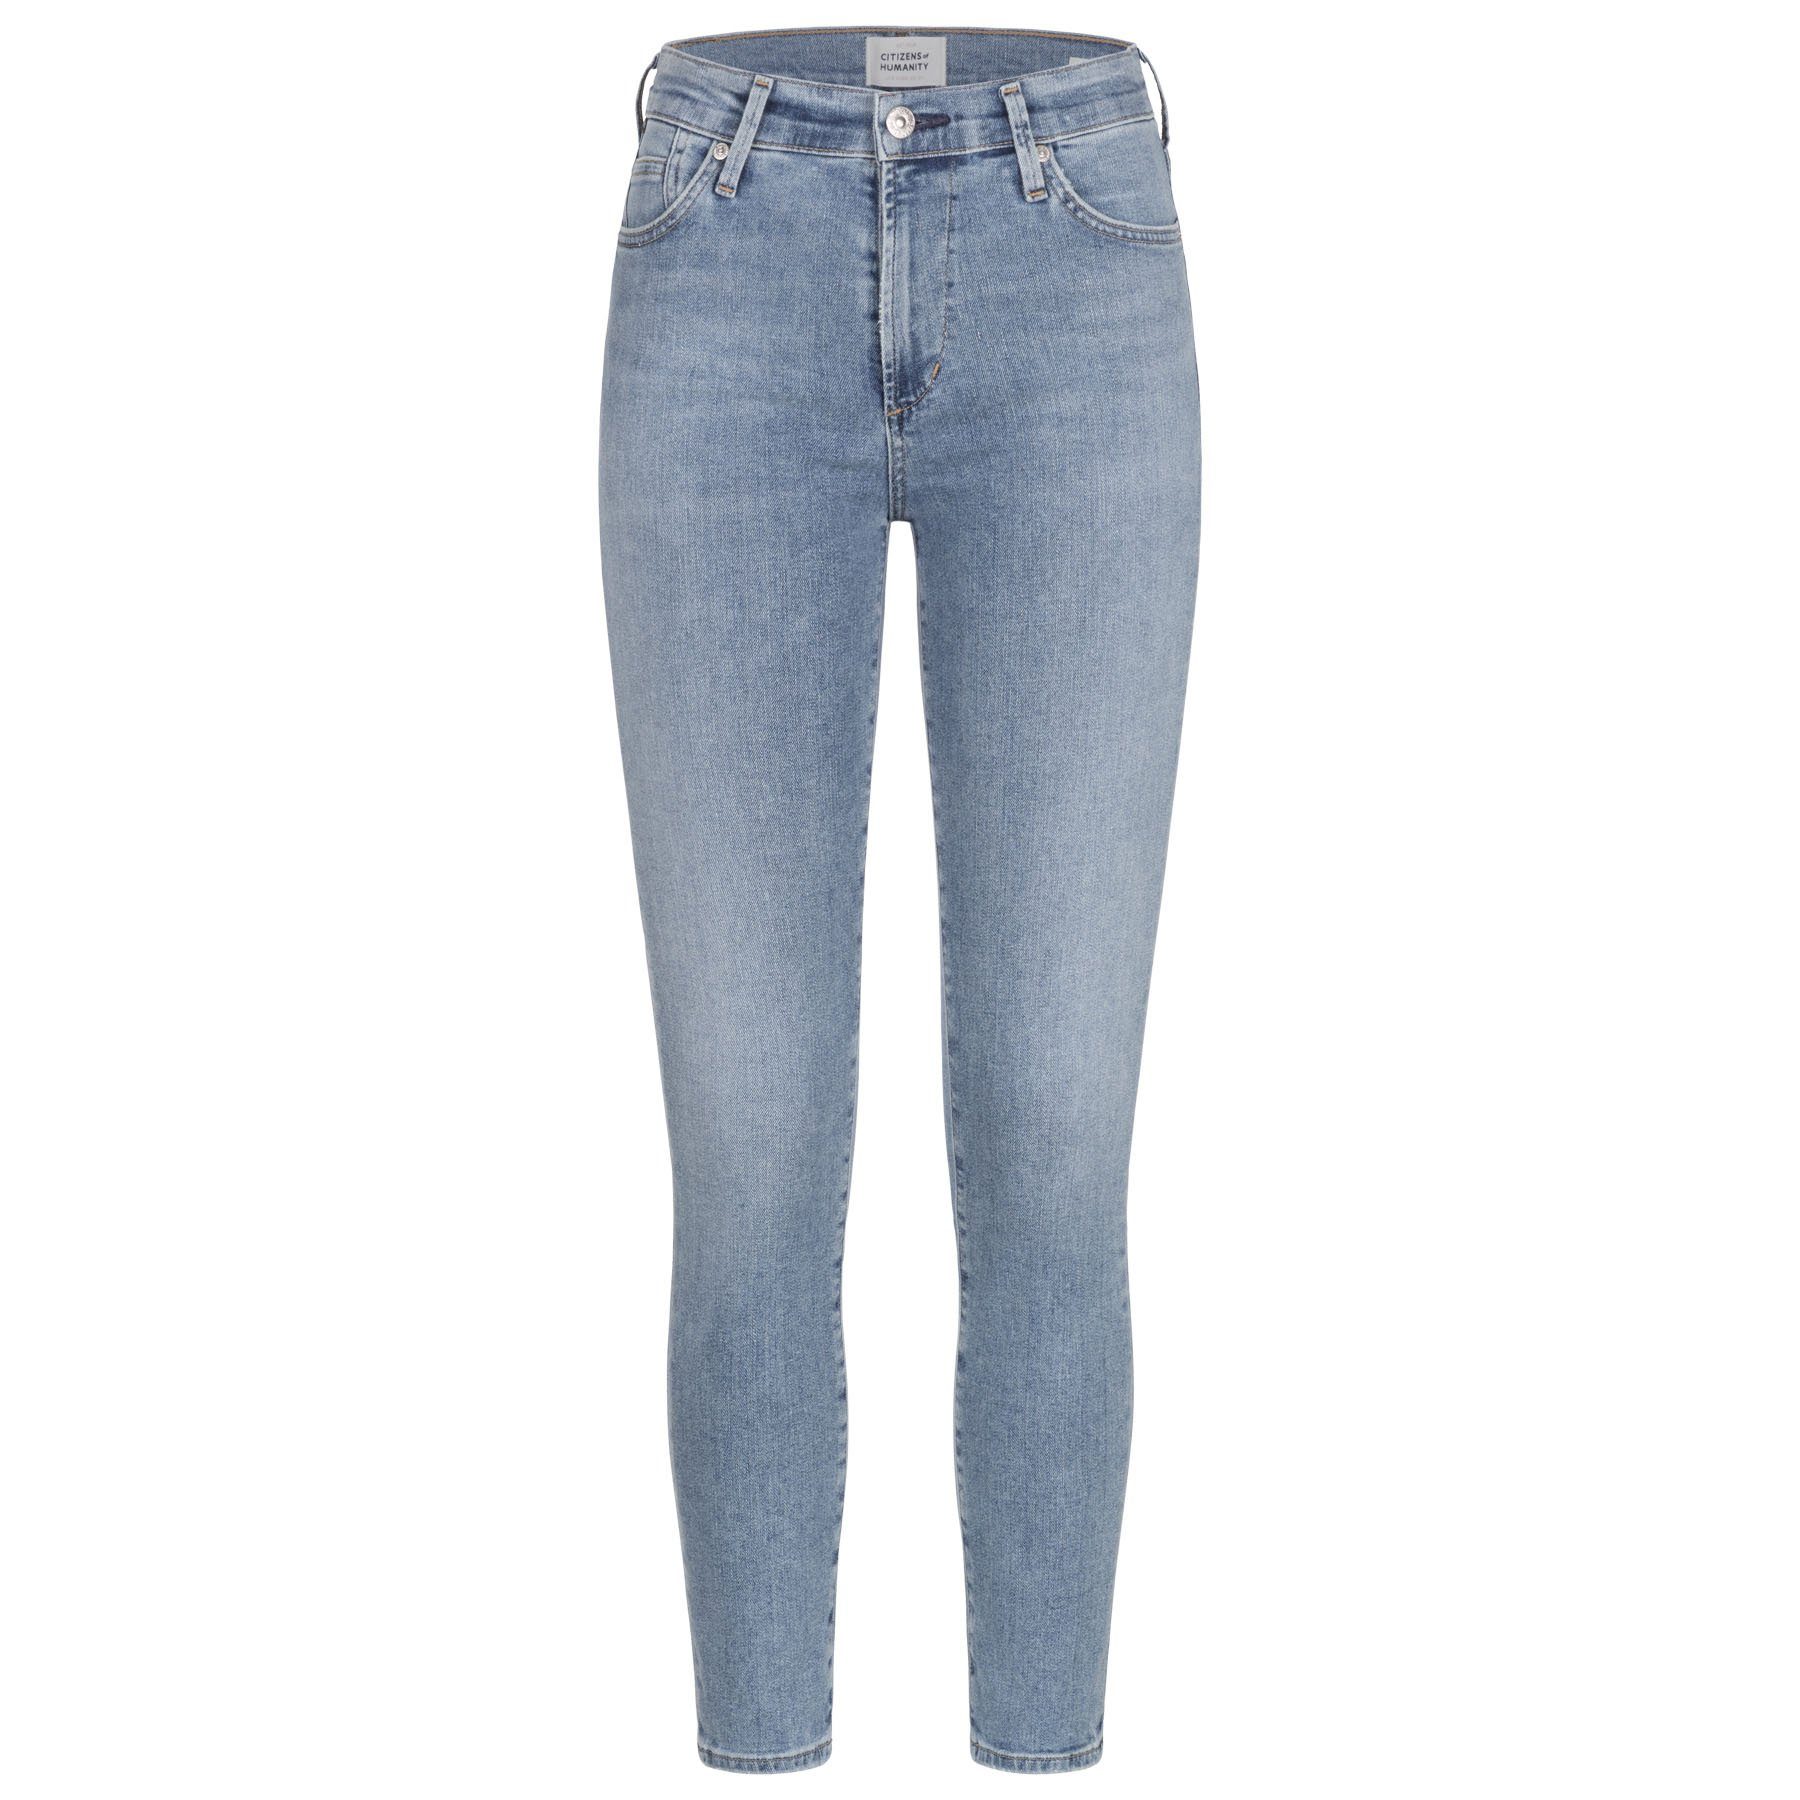 Mid Waist HUMANITY Jeans ROCKET CITIZENS OF ANKLE Low-rise-Jeans